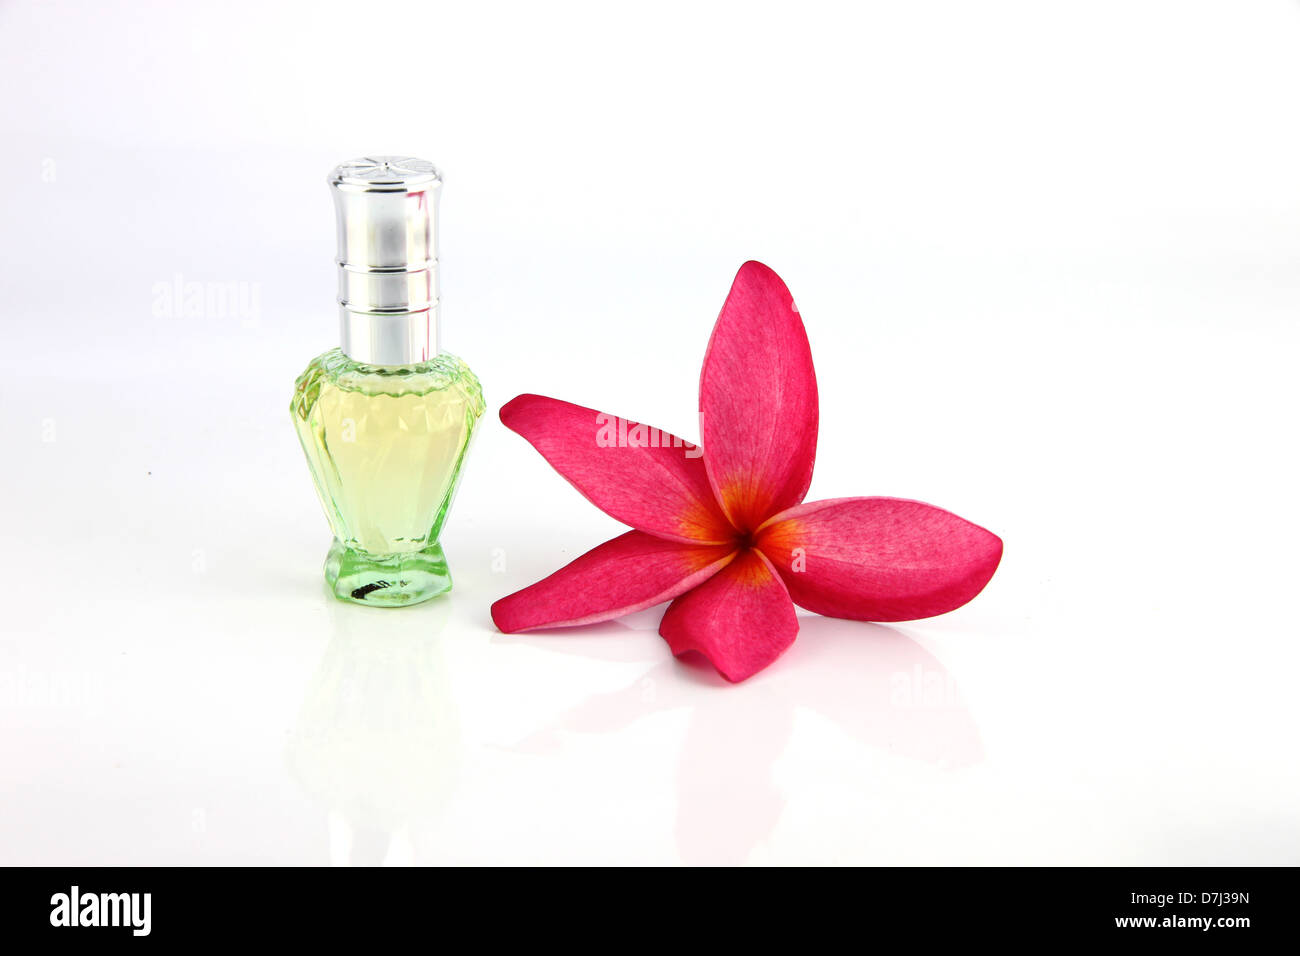 Red flowers and Green Perfume bottles on the white background. Stock Photo